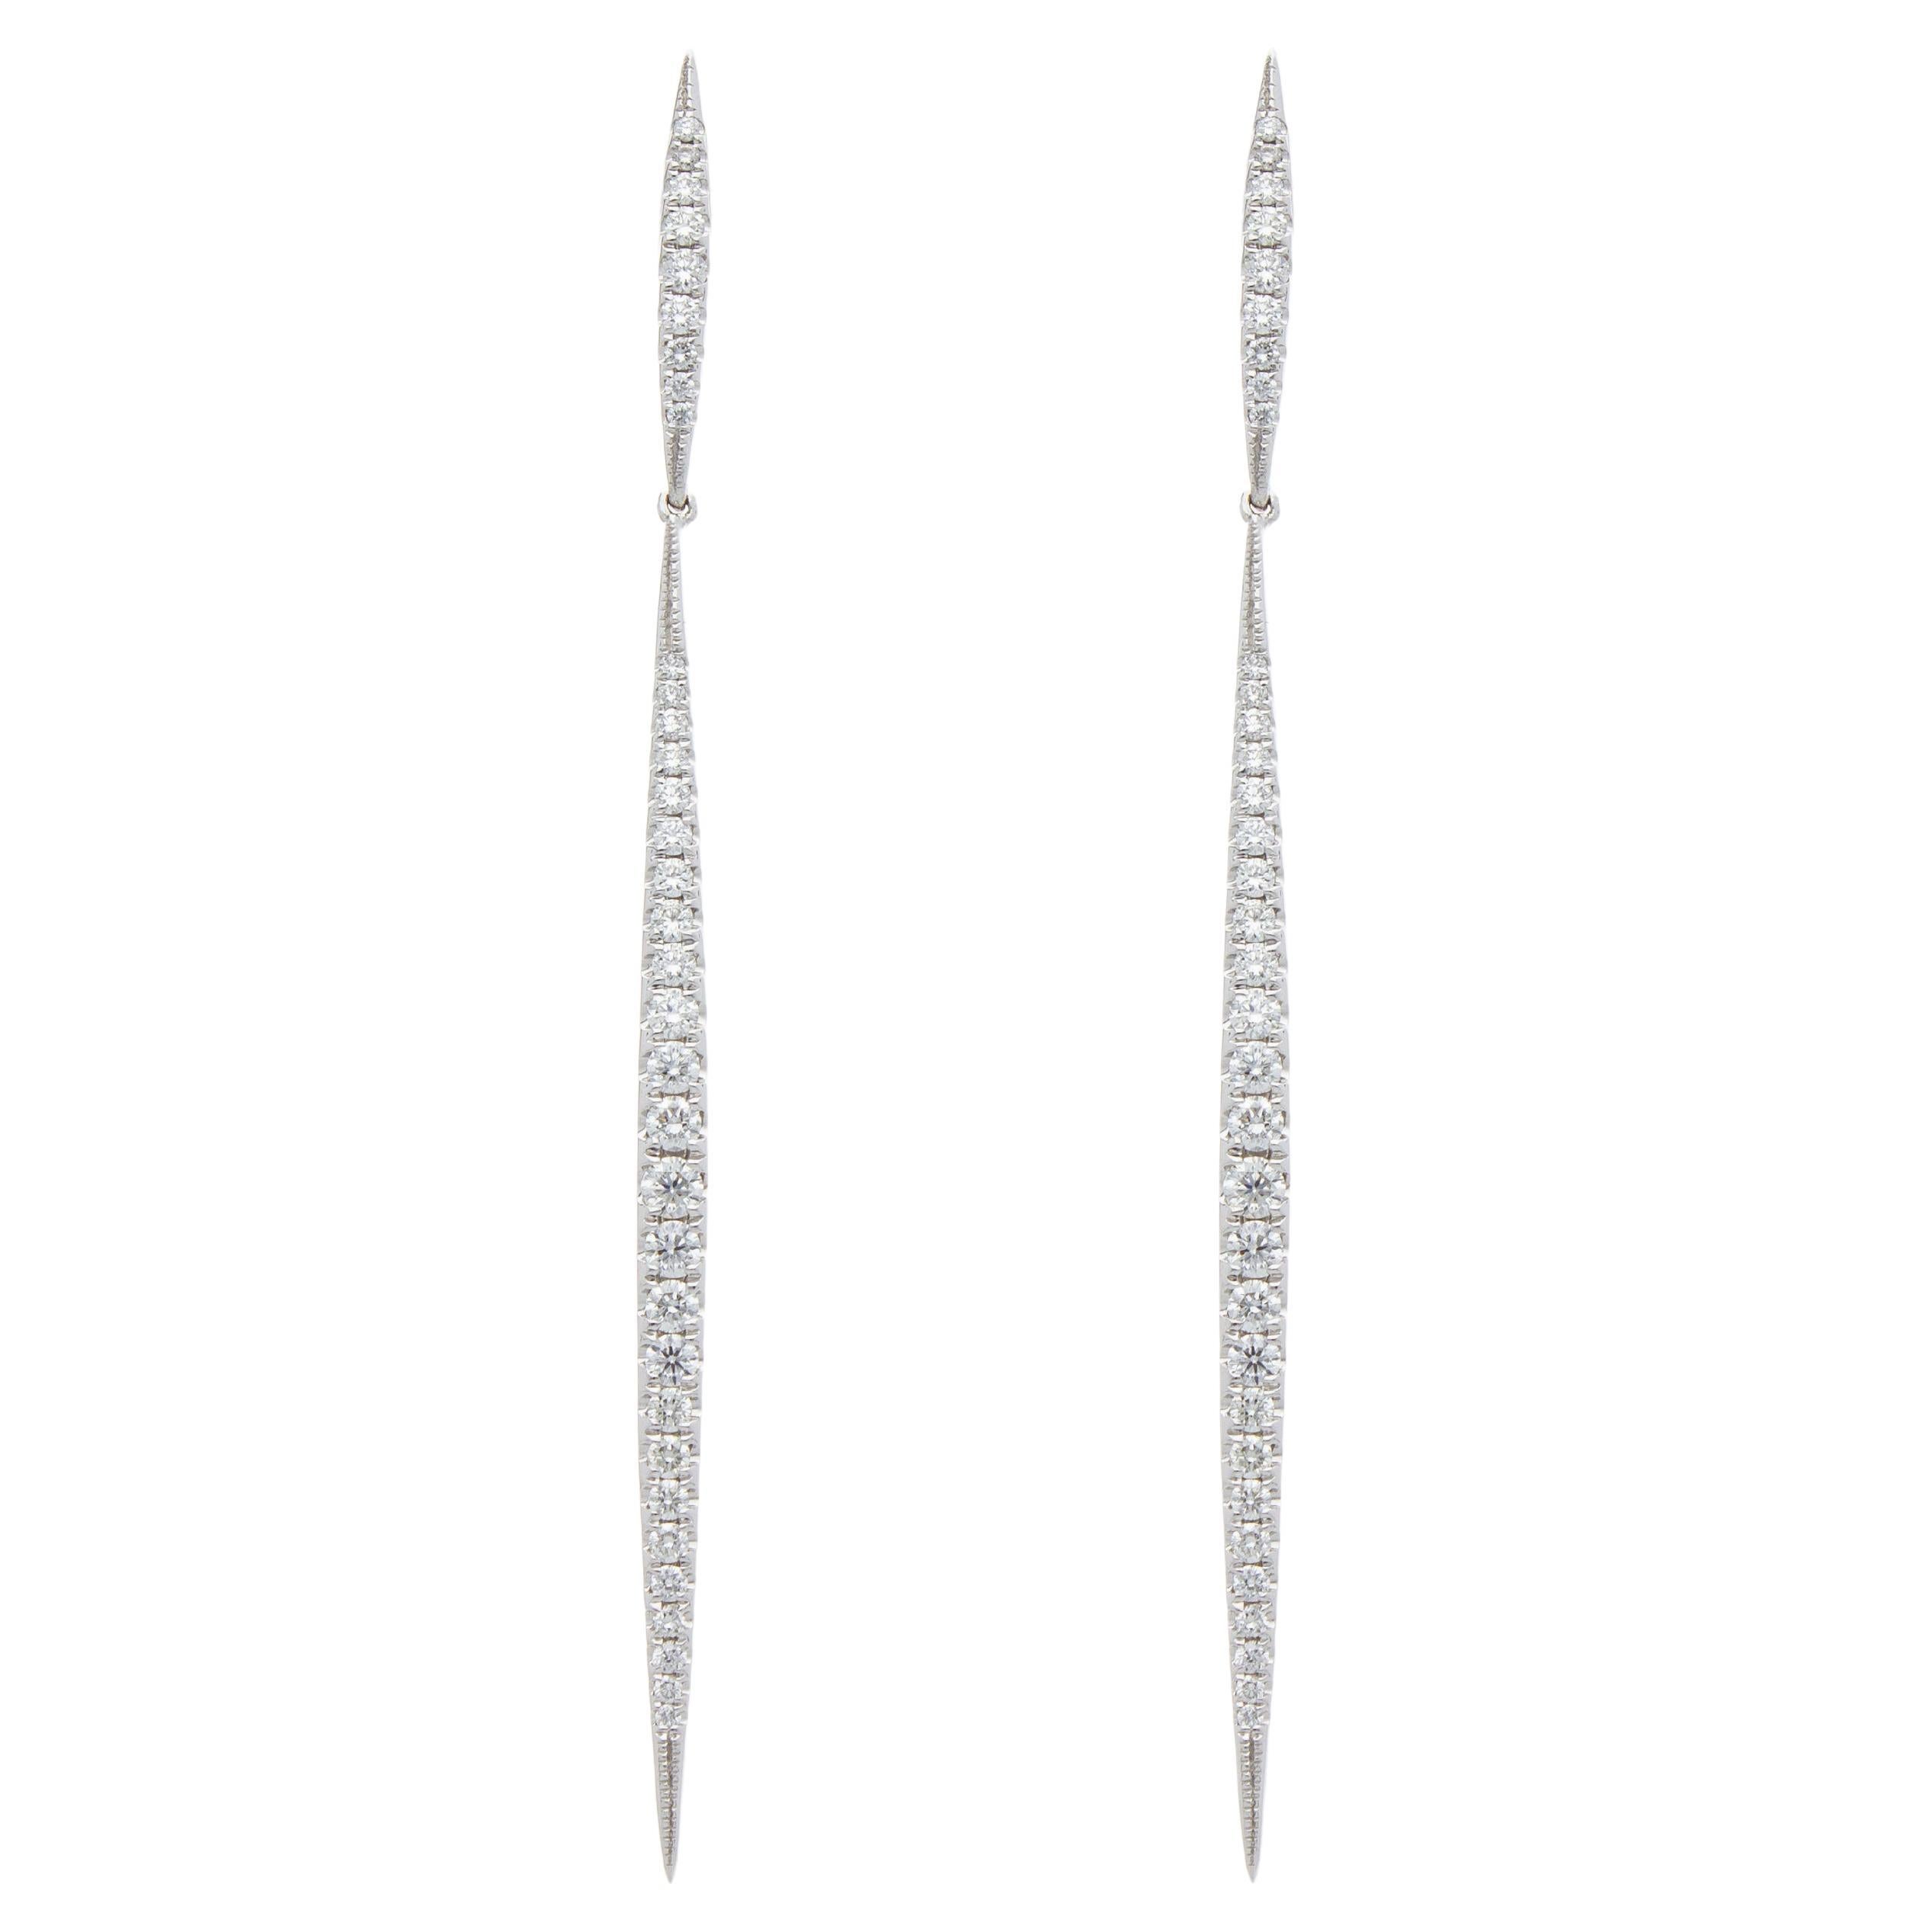 Earrings with 0.74 Ct of Gradated Diamonds, on Hanging Bars, 18 Kt White Gold For Sale